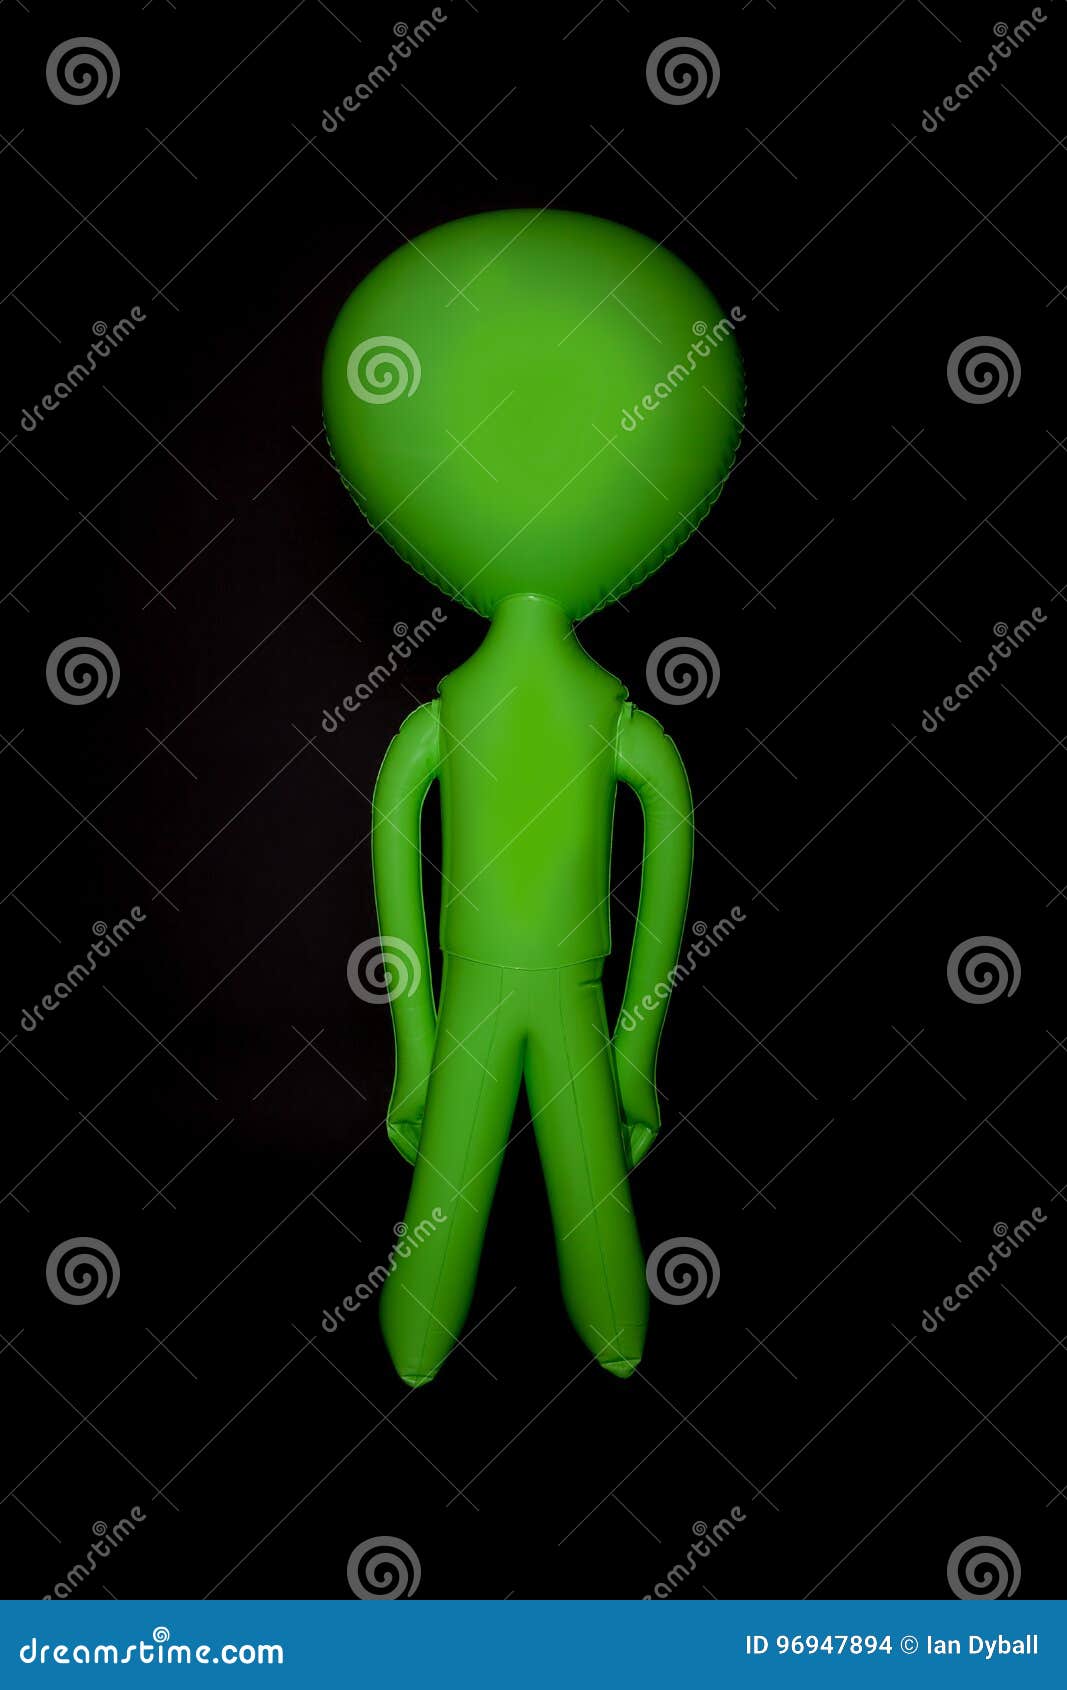 alien. blank inflatable little green man. stereotypical body   against black background.